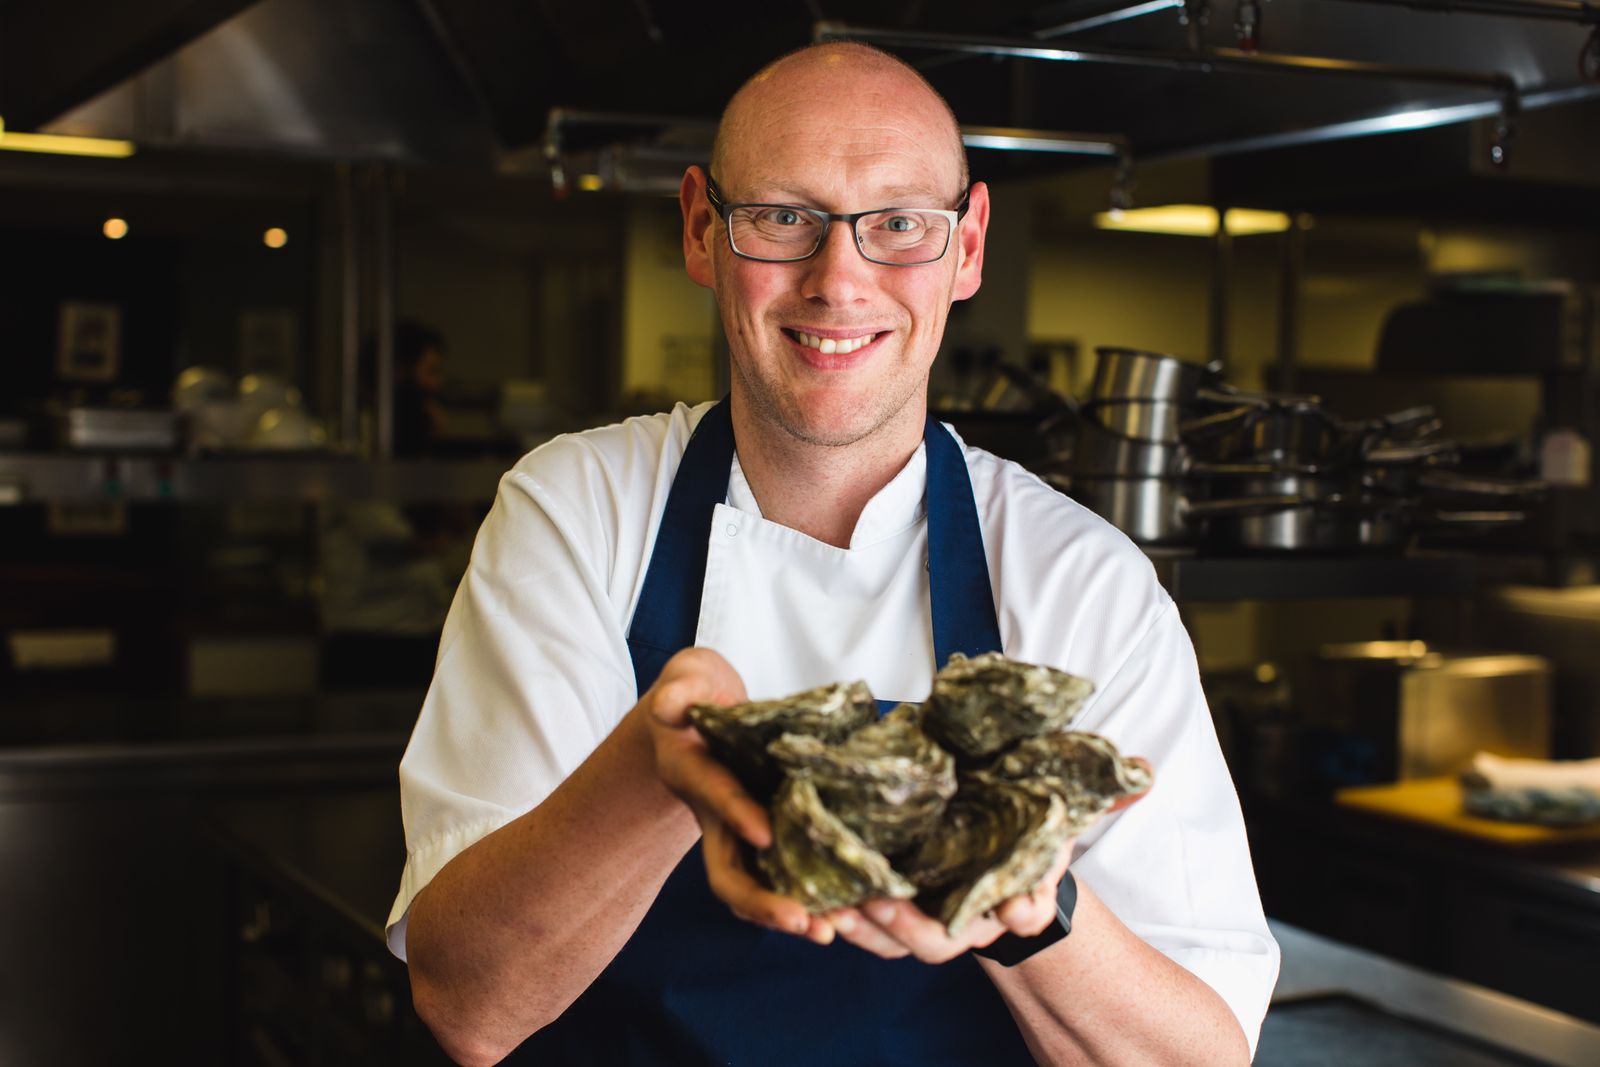 Chef Steve Smith's Top Tips for Serving Oysters